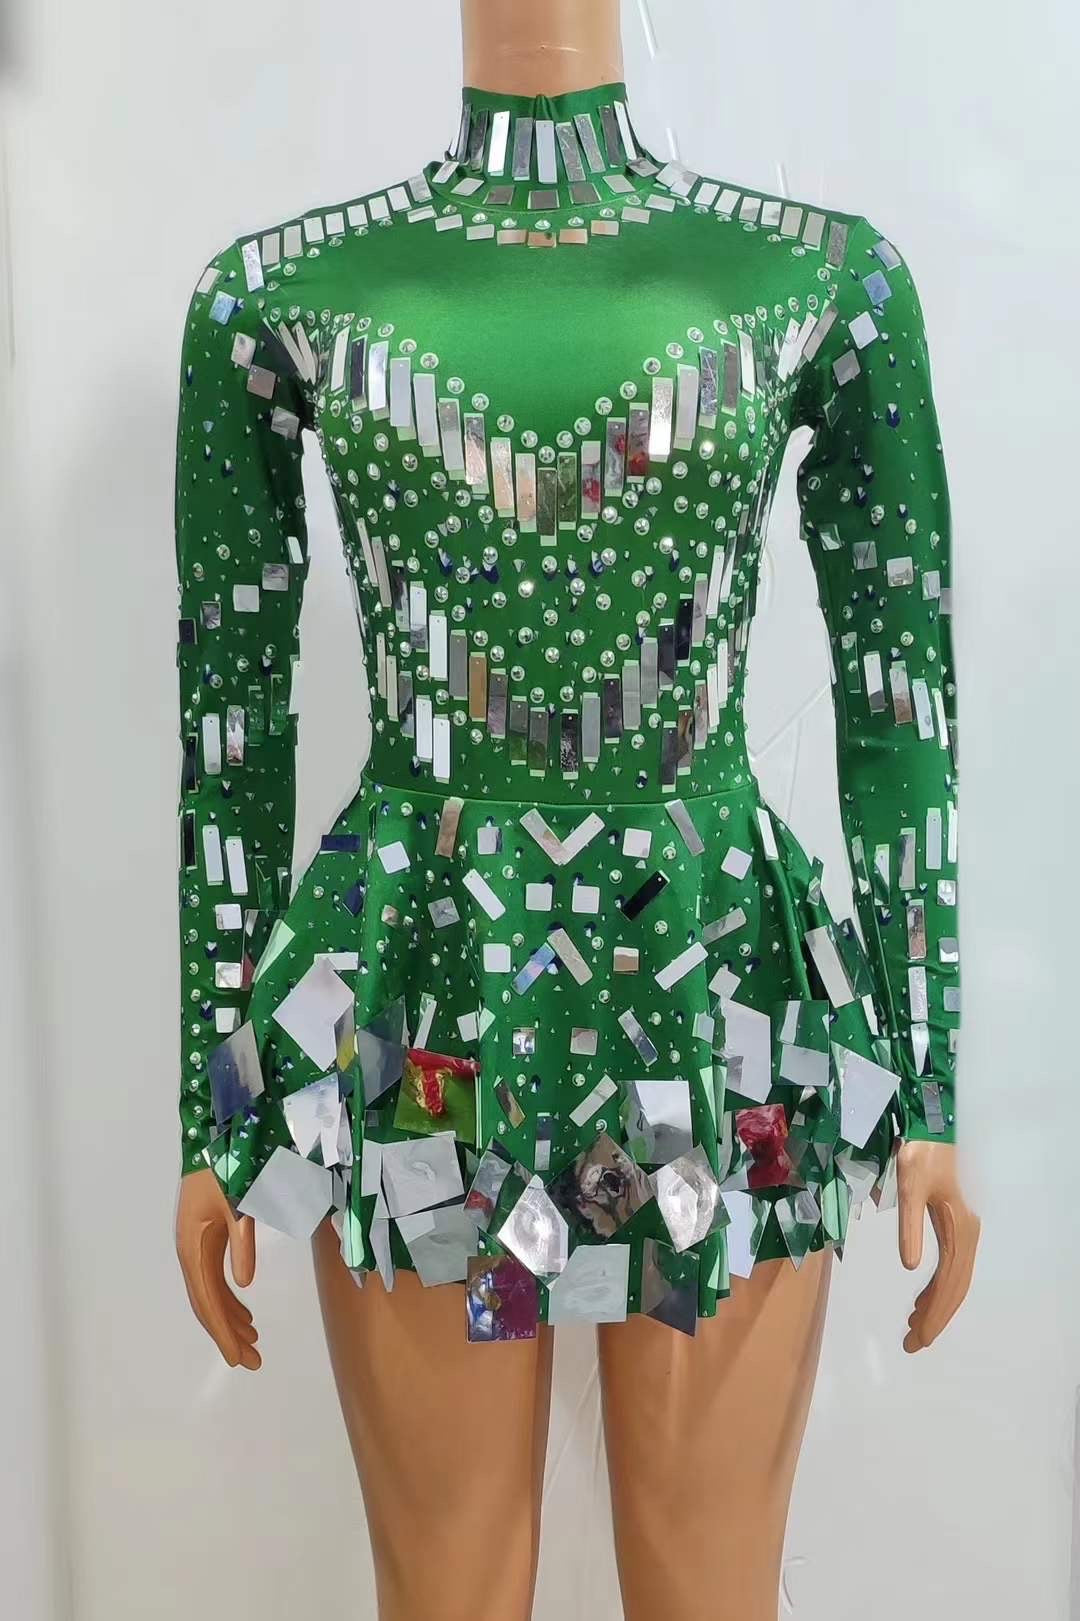 Disco Green and Silver remix dress